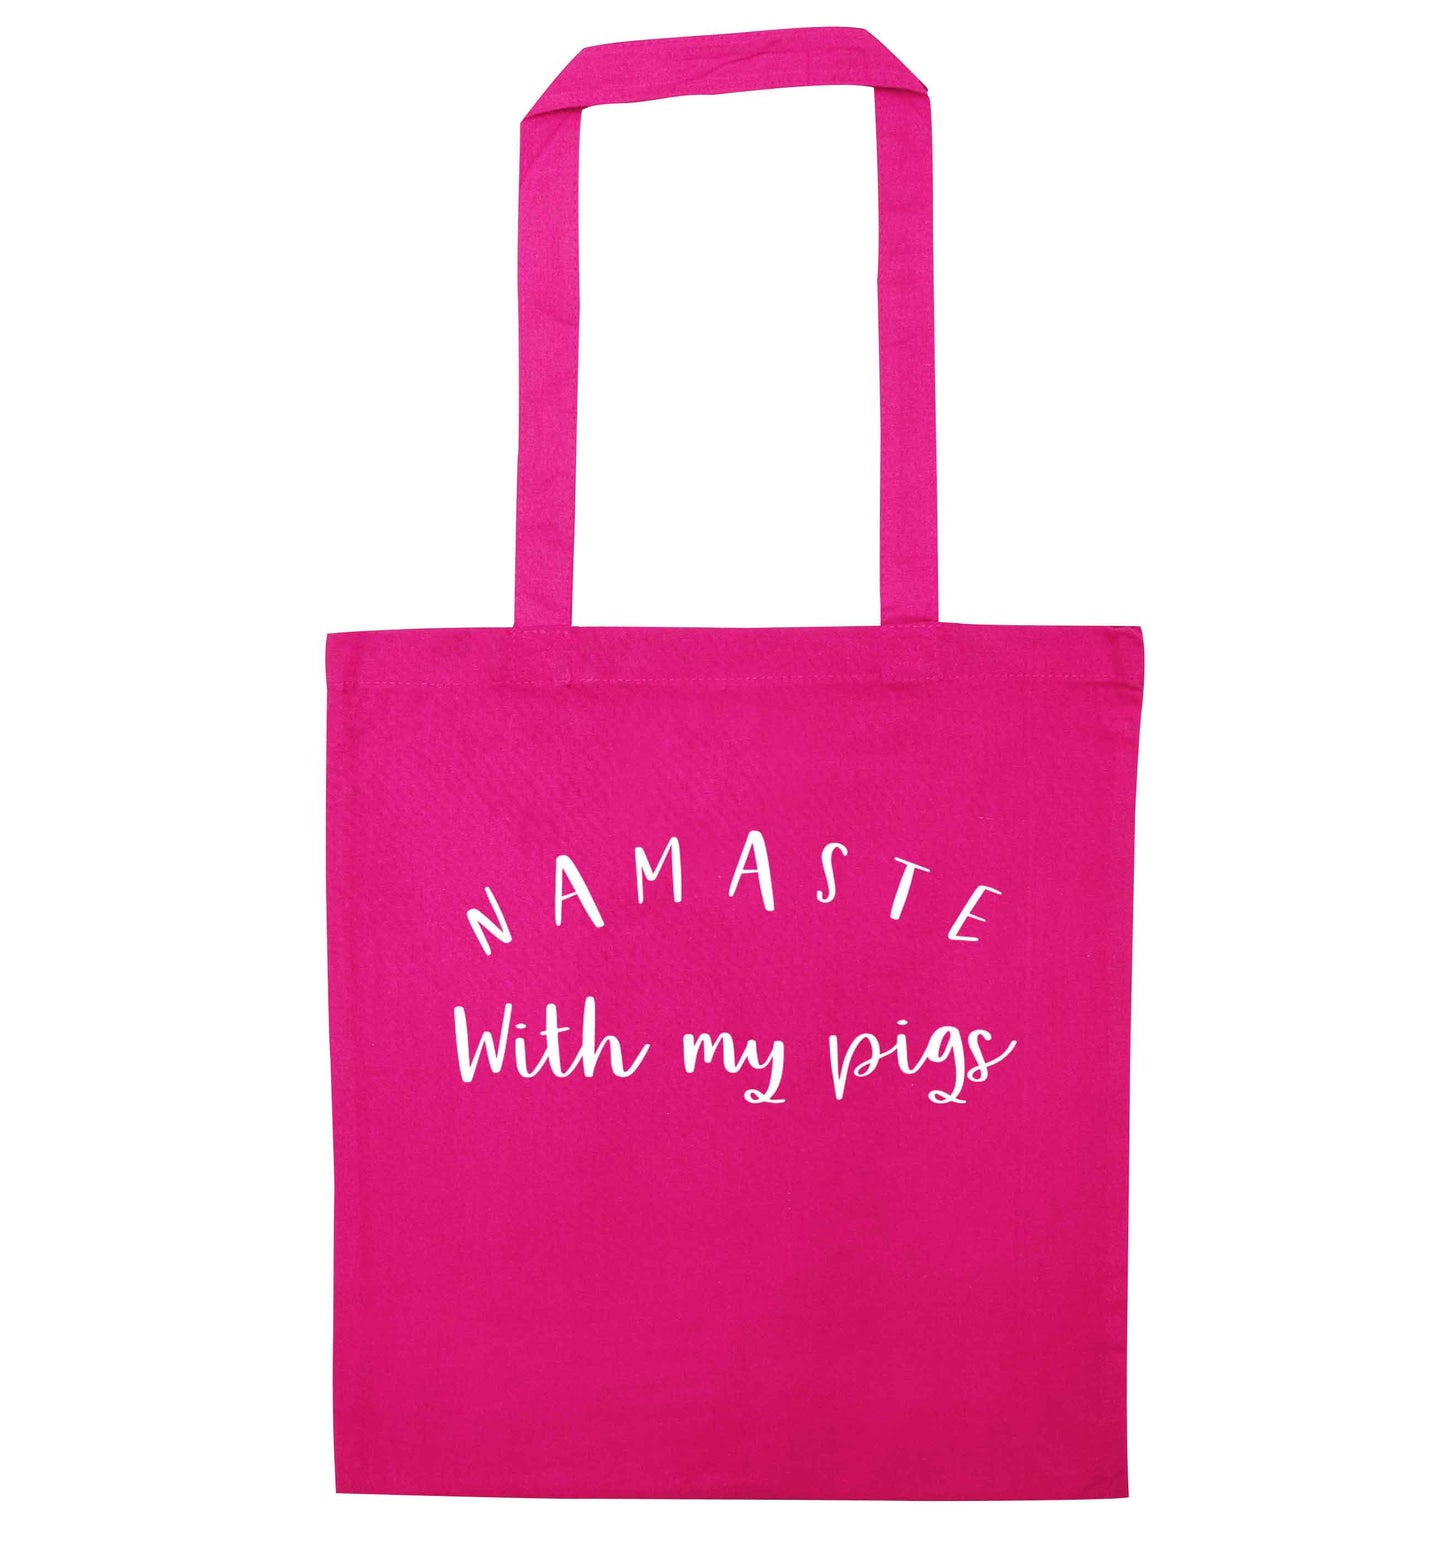 Namaste with my pigs pink tote bag